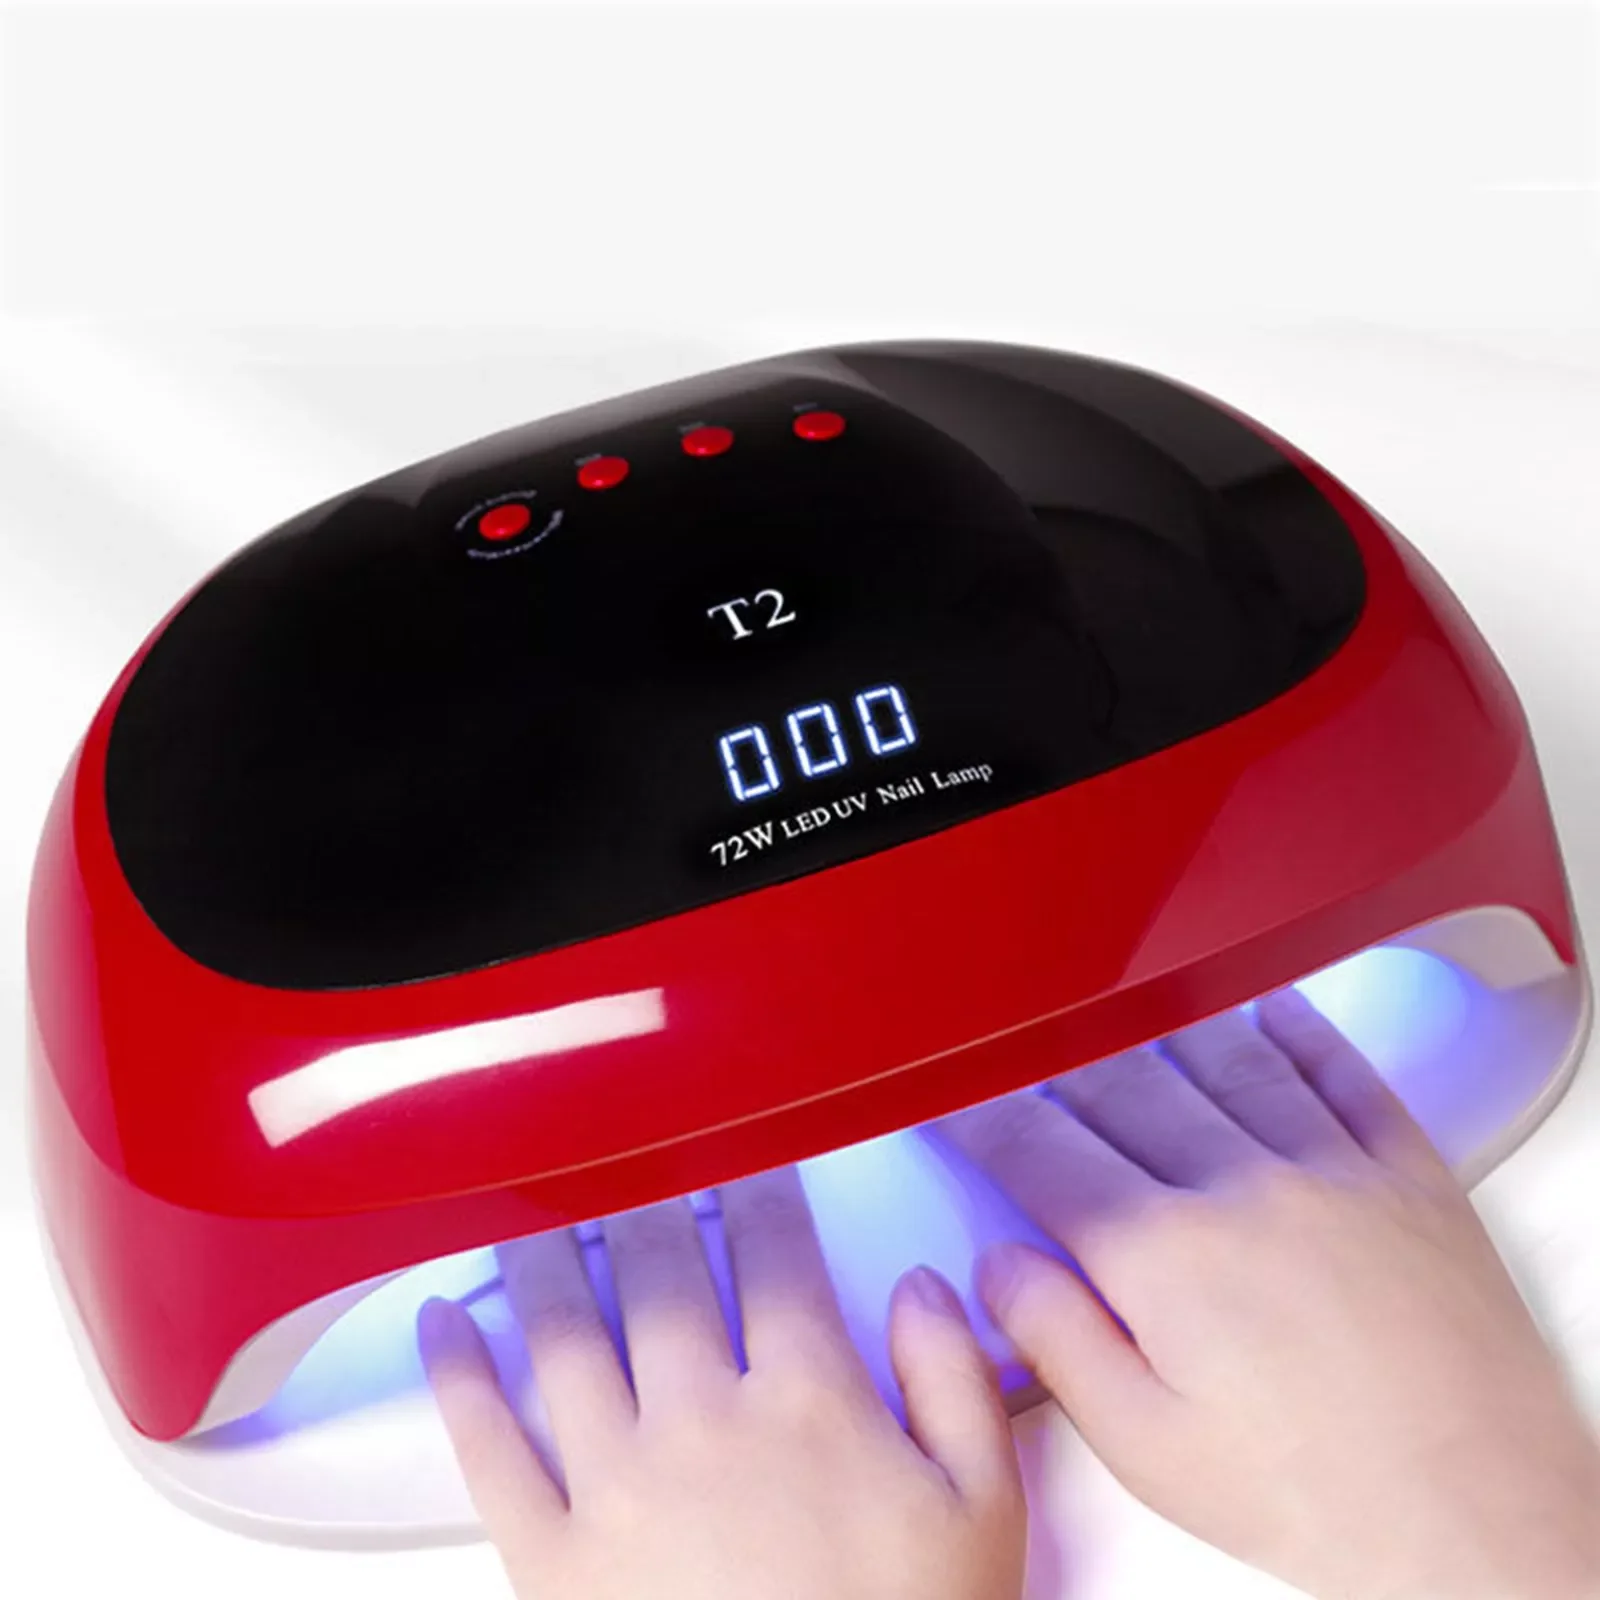 

NEW2023 72W UV Lamp LED Nail Lamp With 36 LEDs Two Hand Lamp Nail Dryer With Smart Sensor Manicure Curing For Nail Art Salon